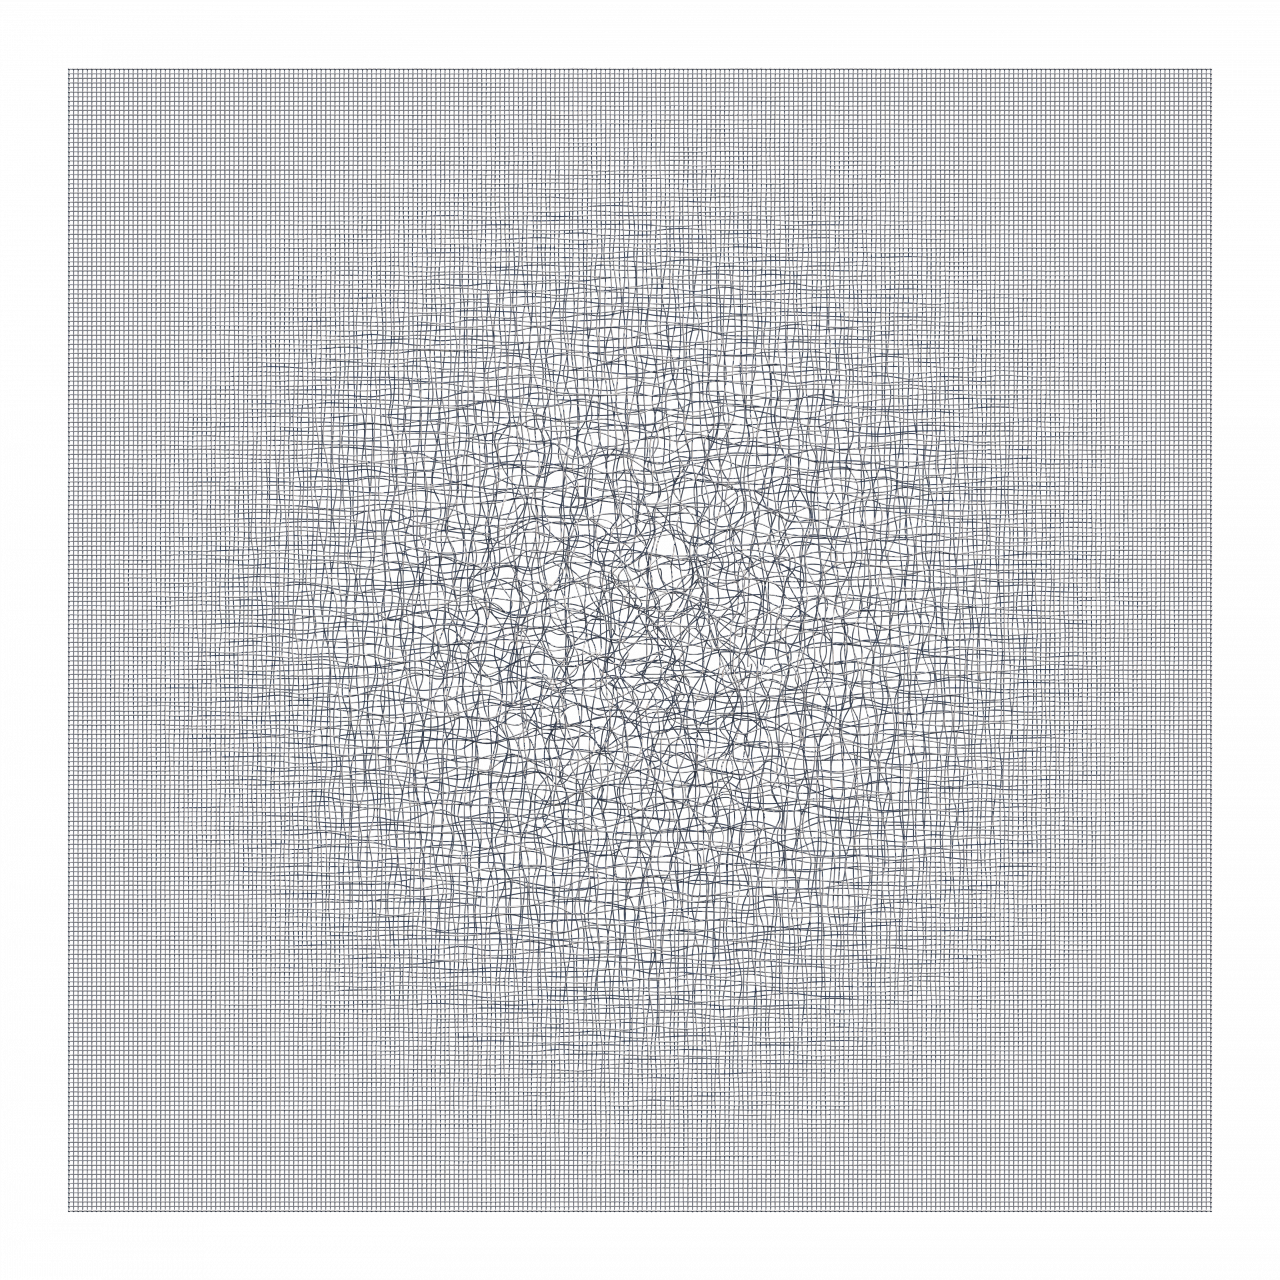 Visualisation of a network of countless fine grey lines